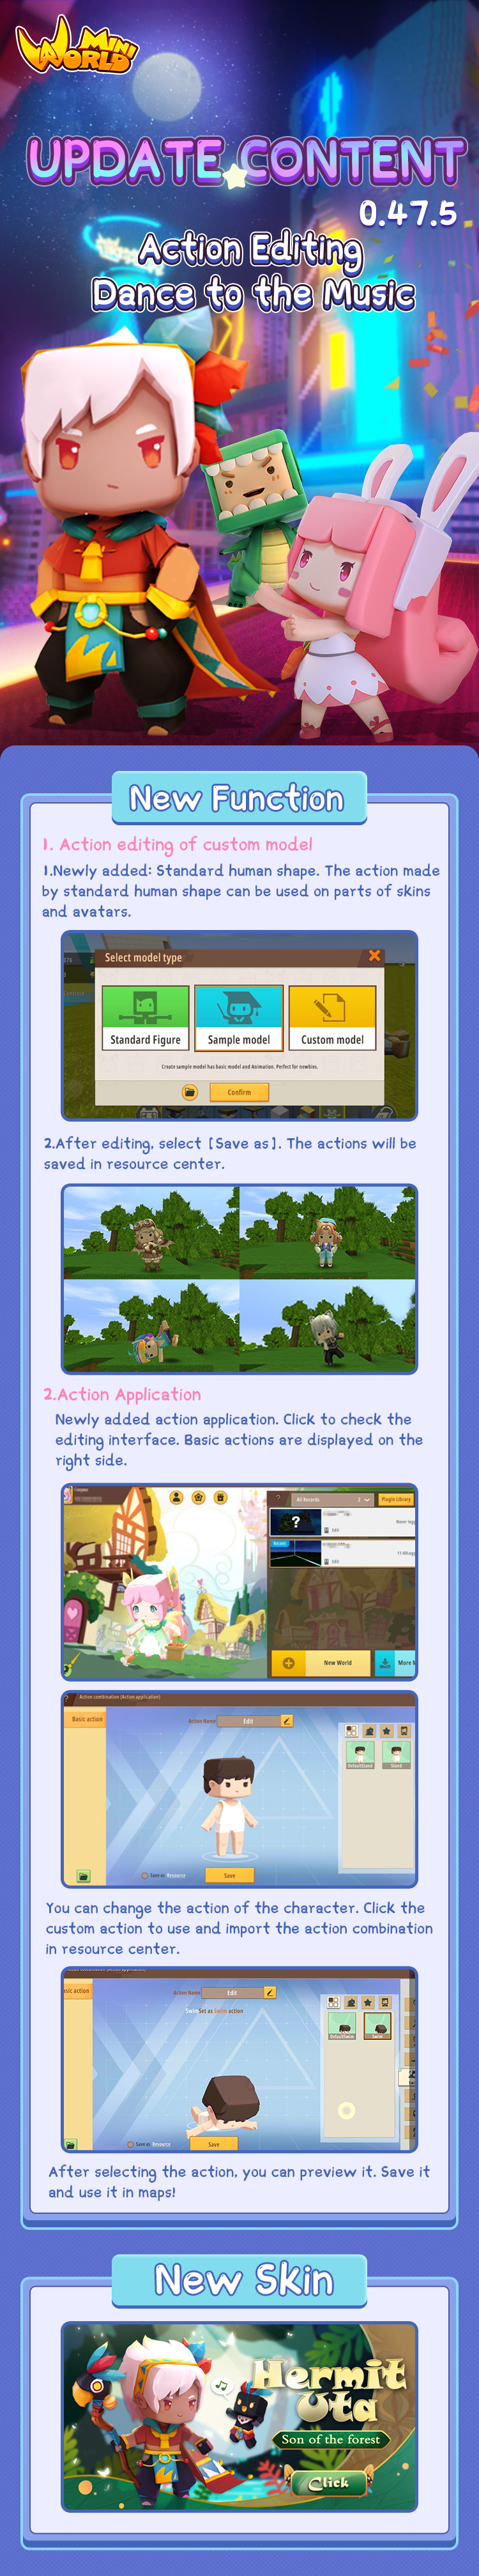 Mini World - Attention 0.26.7 Update is available in all platform now!  First edition ofDIY Avatar function. We will update it monthly and aim to  let each gamer to upload their artwork